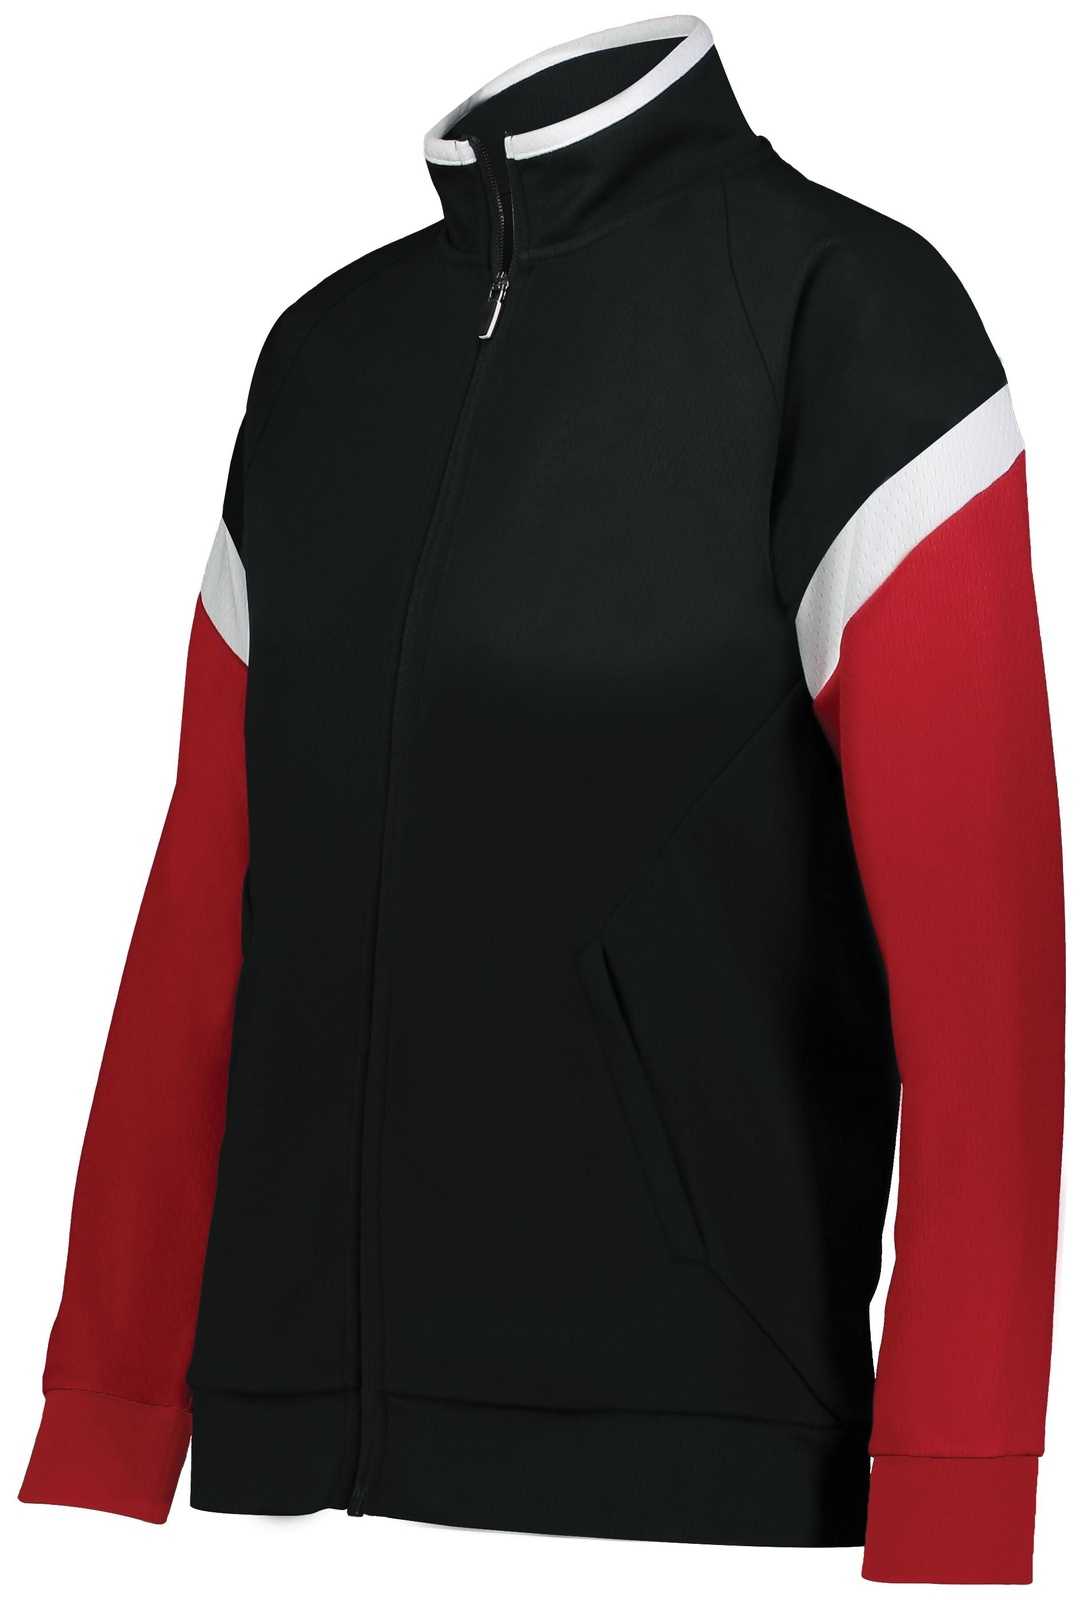 Holloway 229779 Ladies Limitless Jacket - Black White Scarlet - HIT a Double